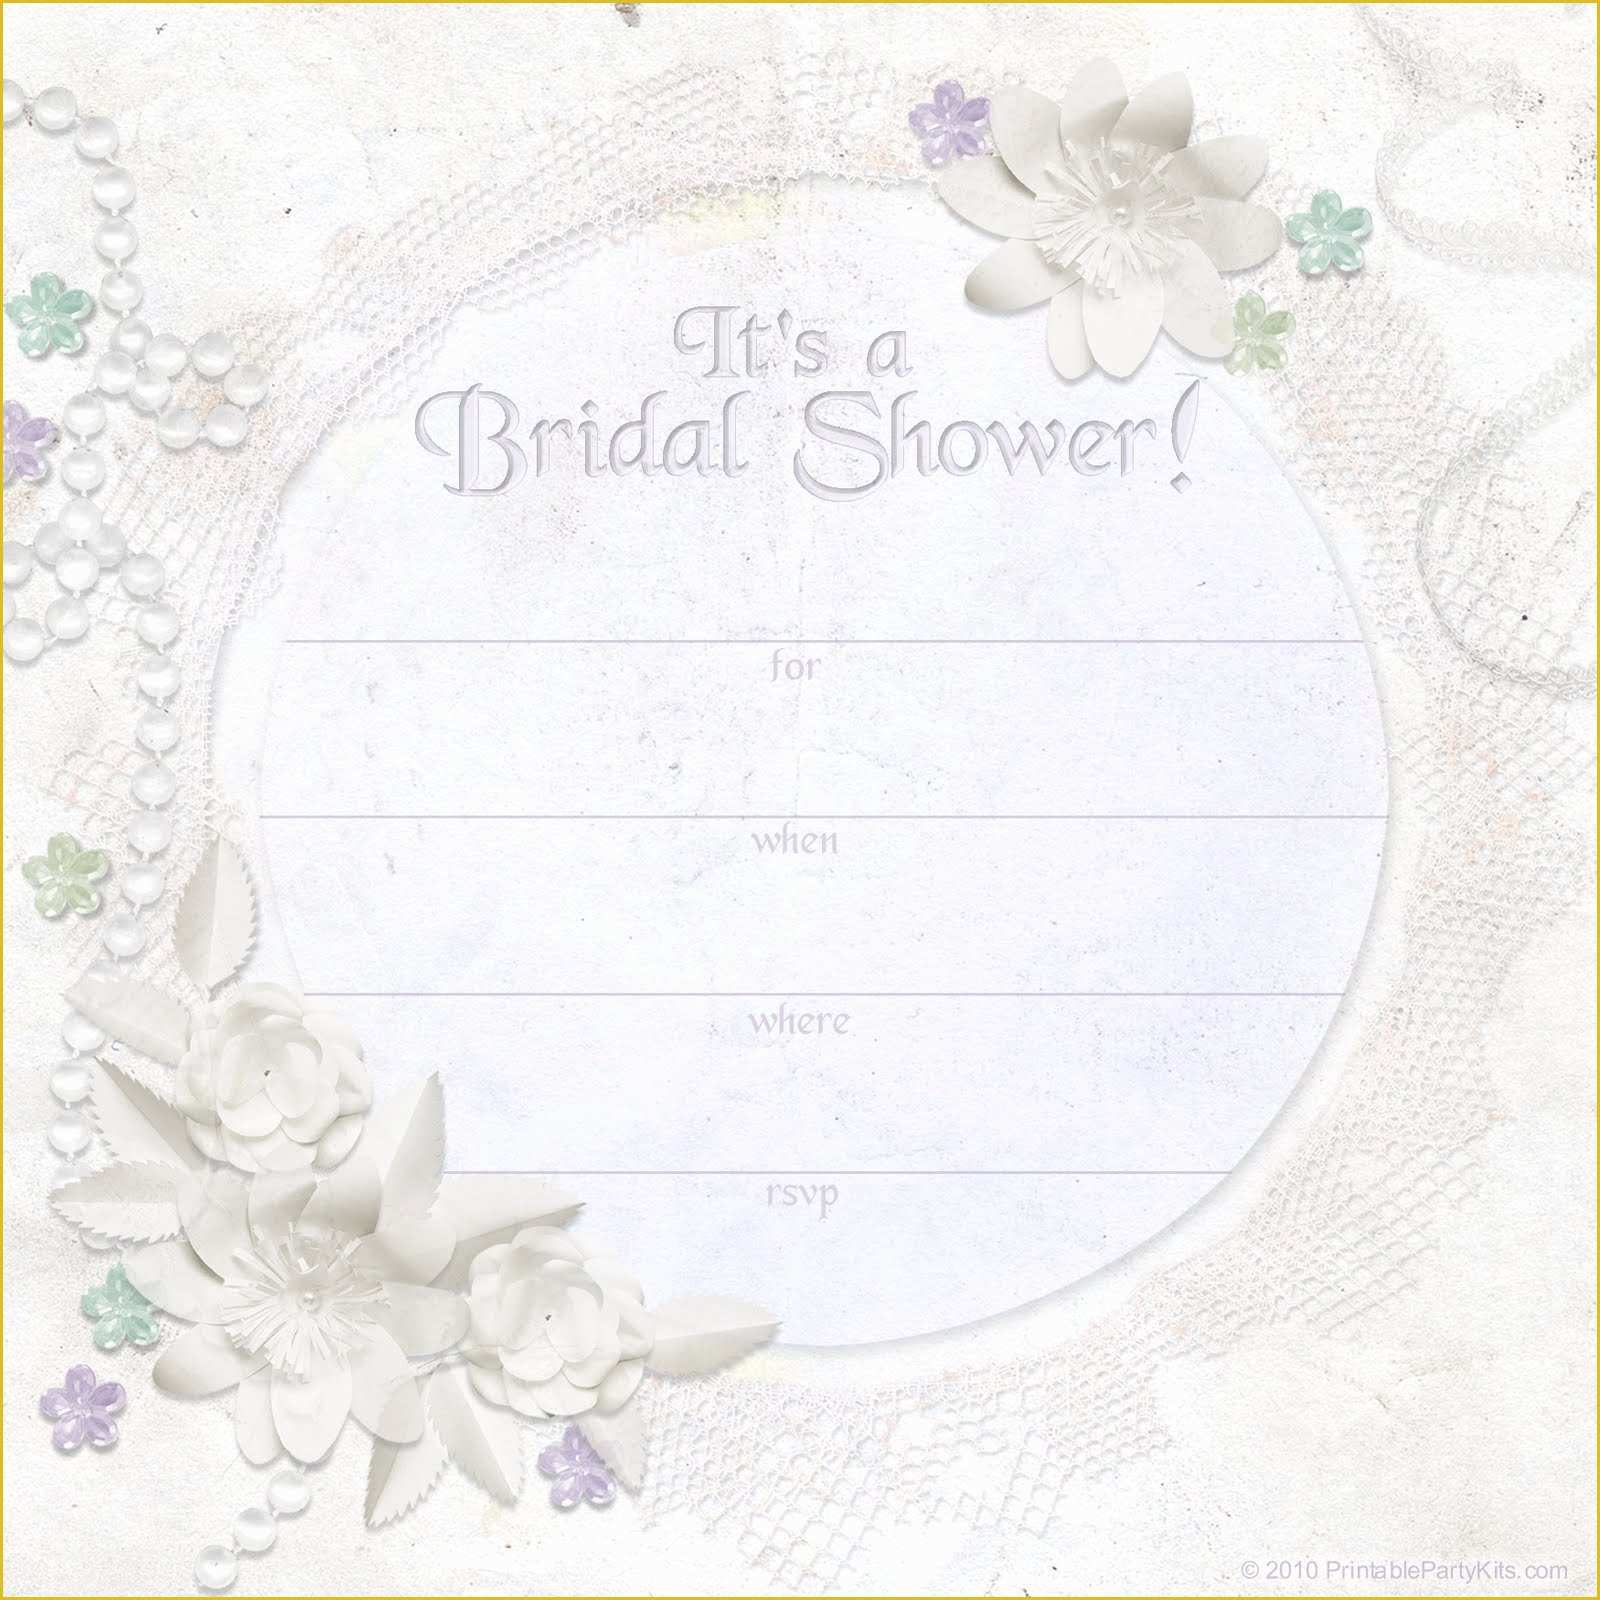 Free Bridal Shower Invitation Templates for Word Of Free Printable Party Invitations Ivory Dreams Bridal